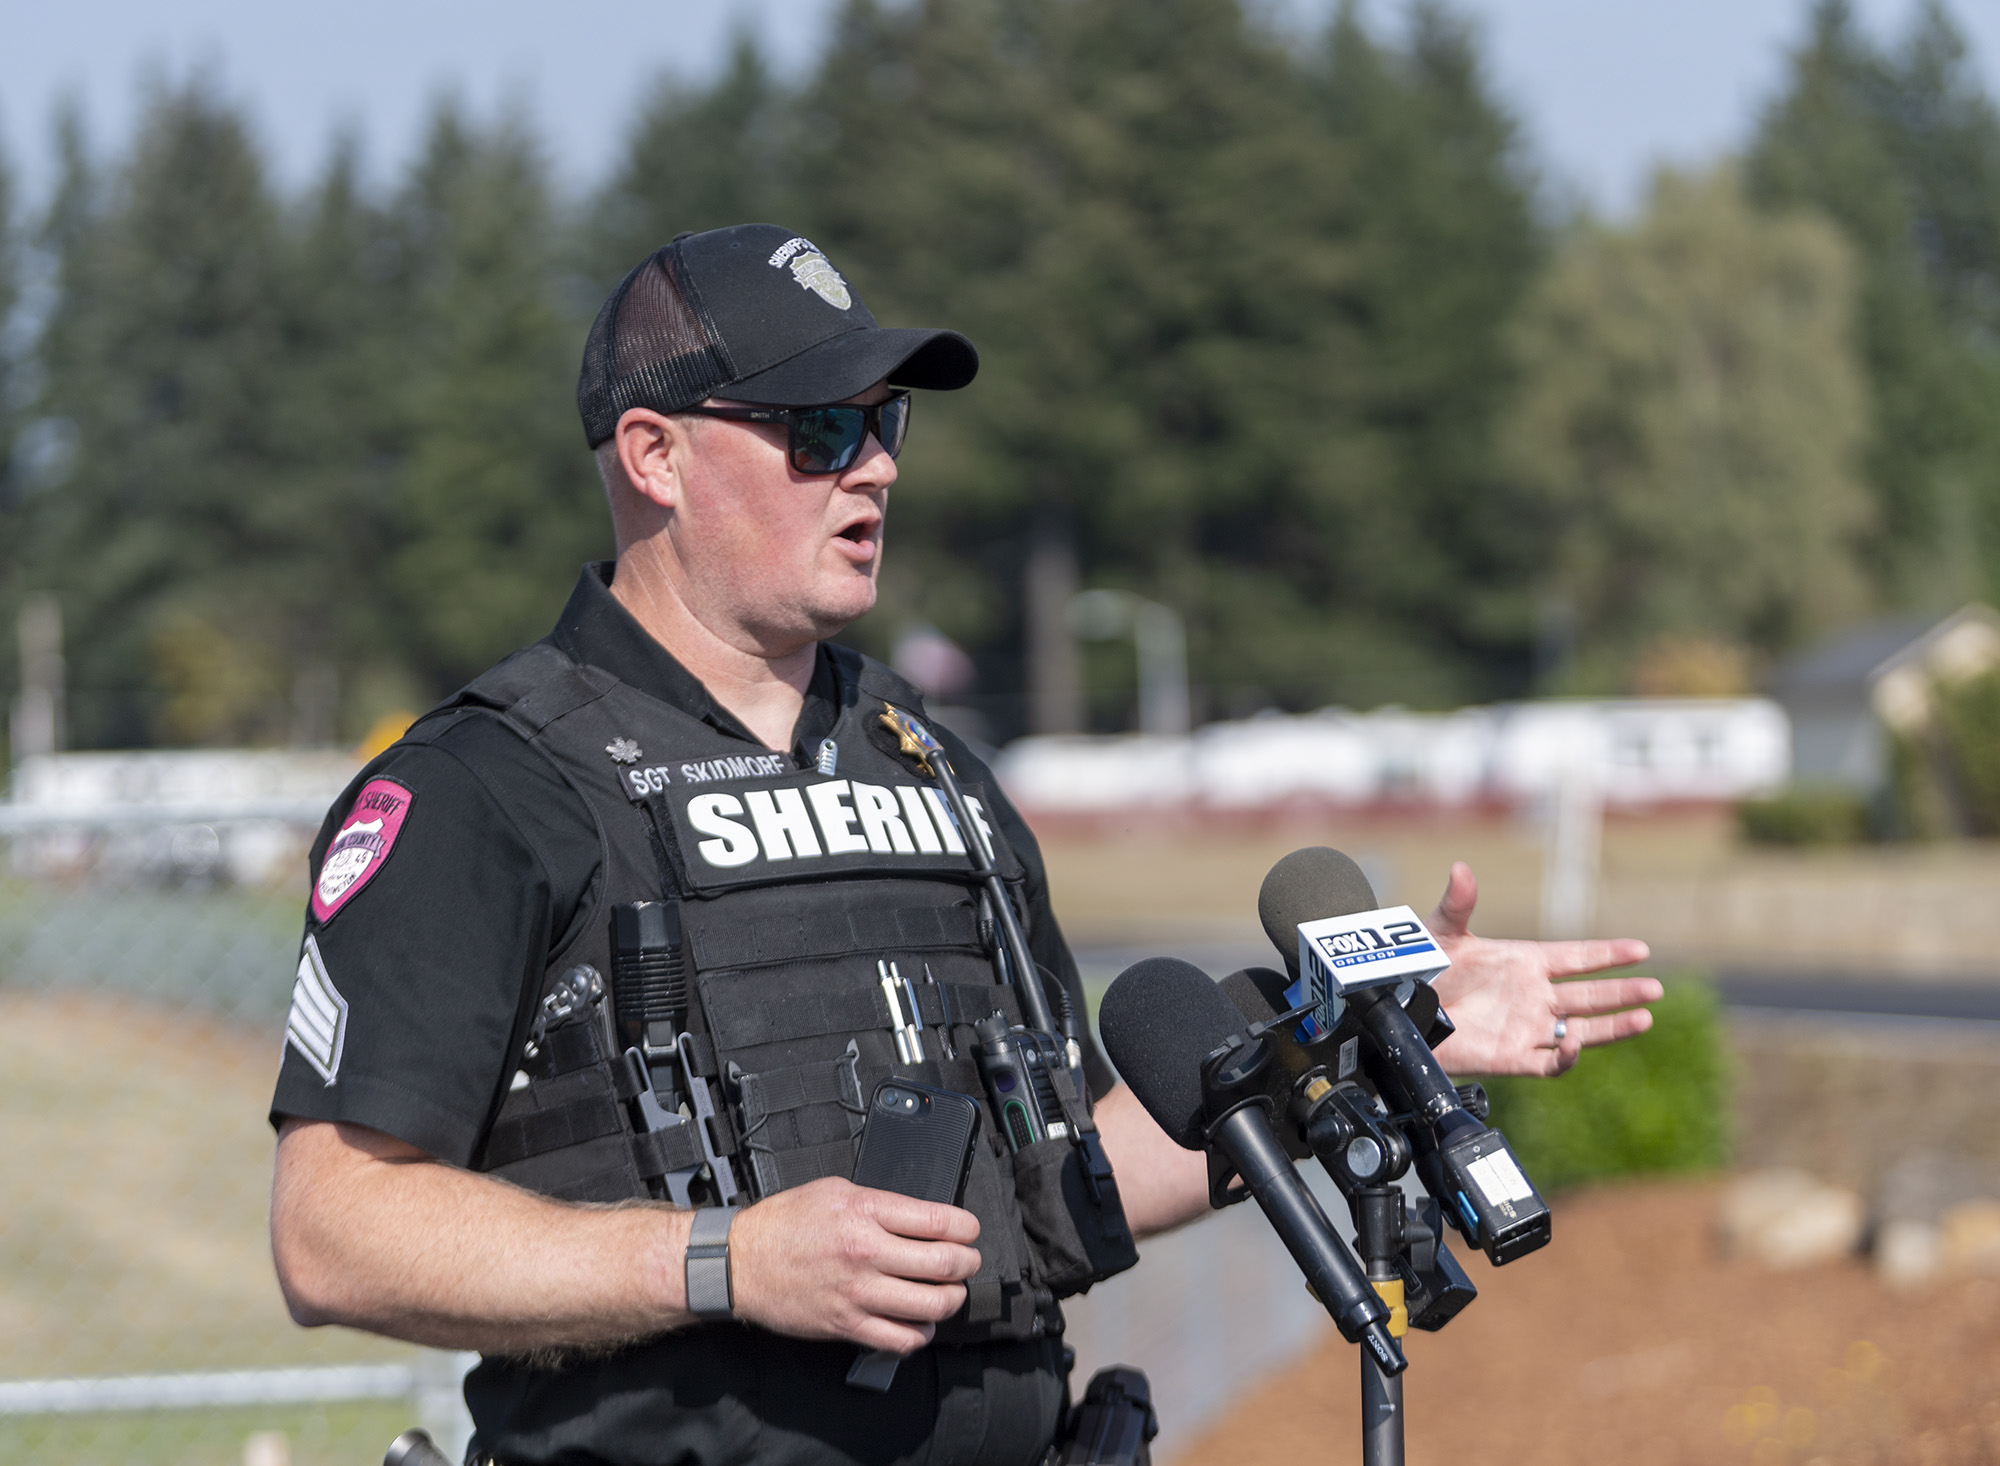 Clark County Sheriff public information officer Chris Skidmore talks to media Monday, Oct. 17, 2022, during a briefing at Grove Field in Camas. The Nakia Creek Fire ballooned to more than 1400 acres after dry and windy conditions on Sunday.